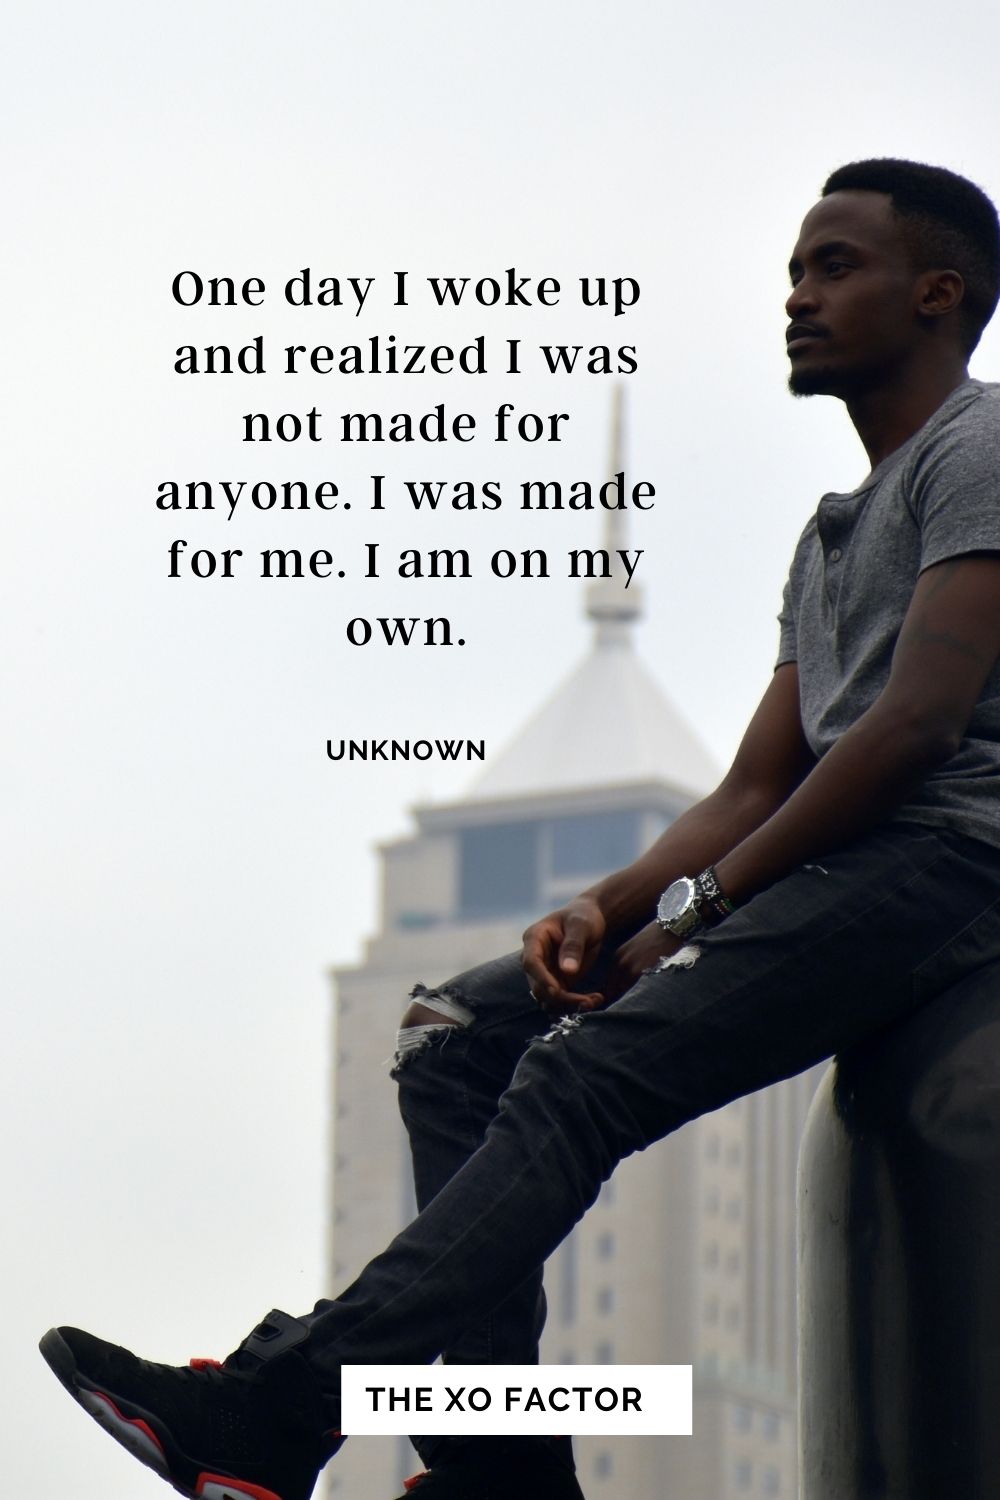 One day I woke up and realized I was not made for anyone. I was made for me. I am on my own. Unknown